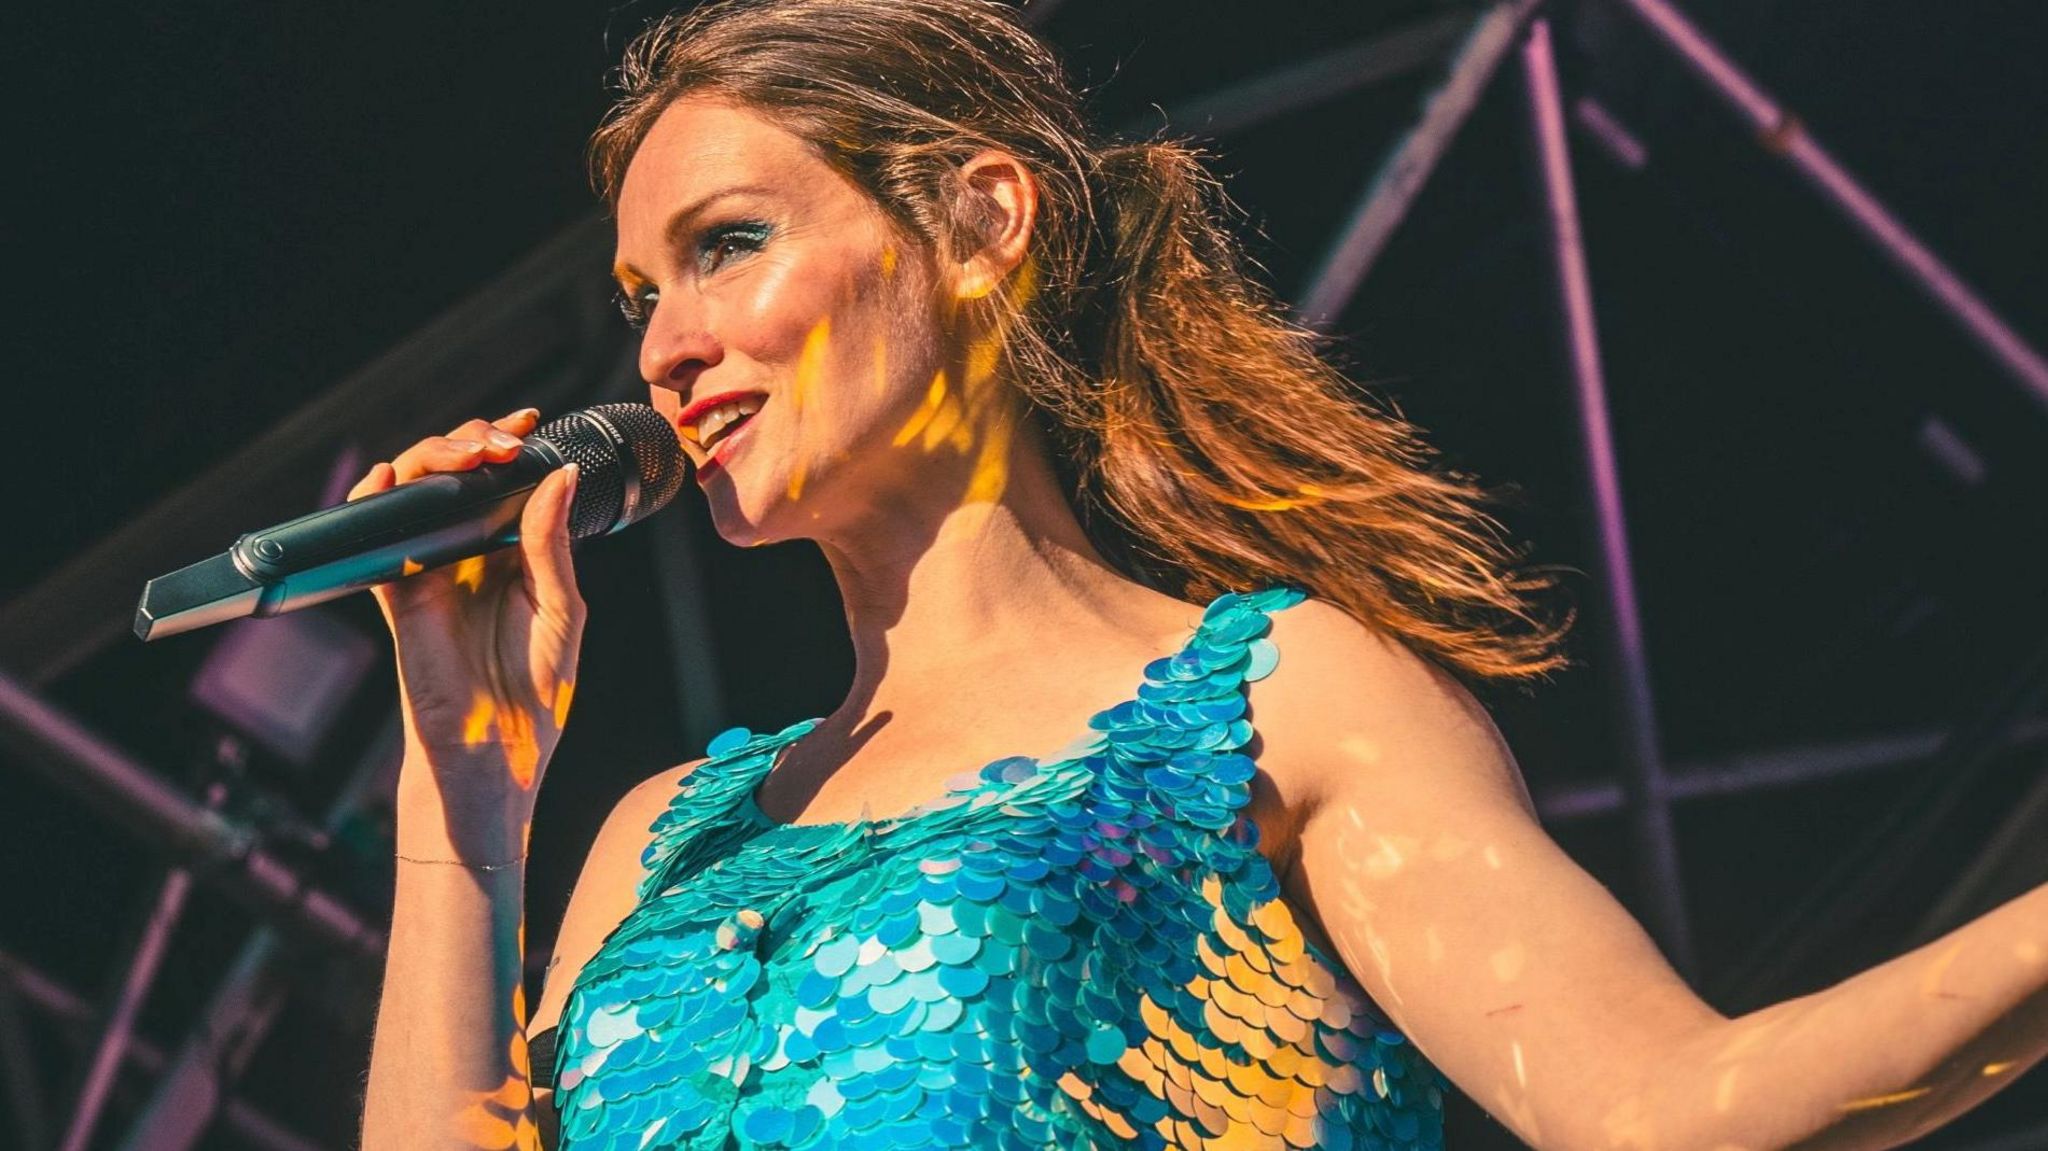 Sophie Ellis-Bexter on stage with a microphone wearing a blue sequin tank top